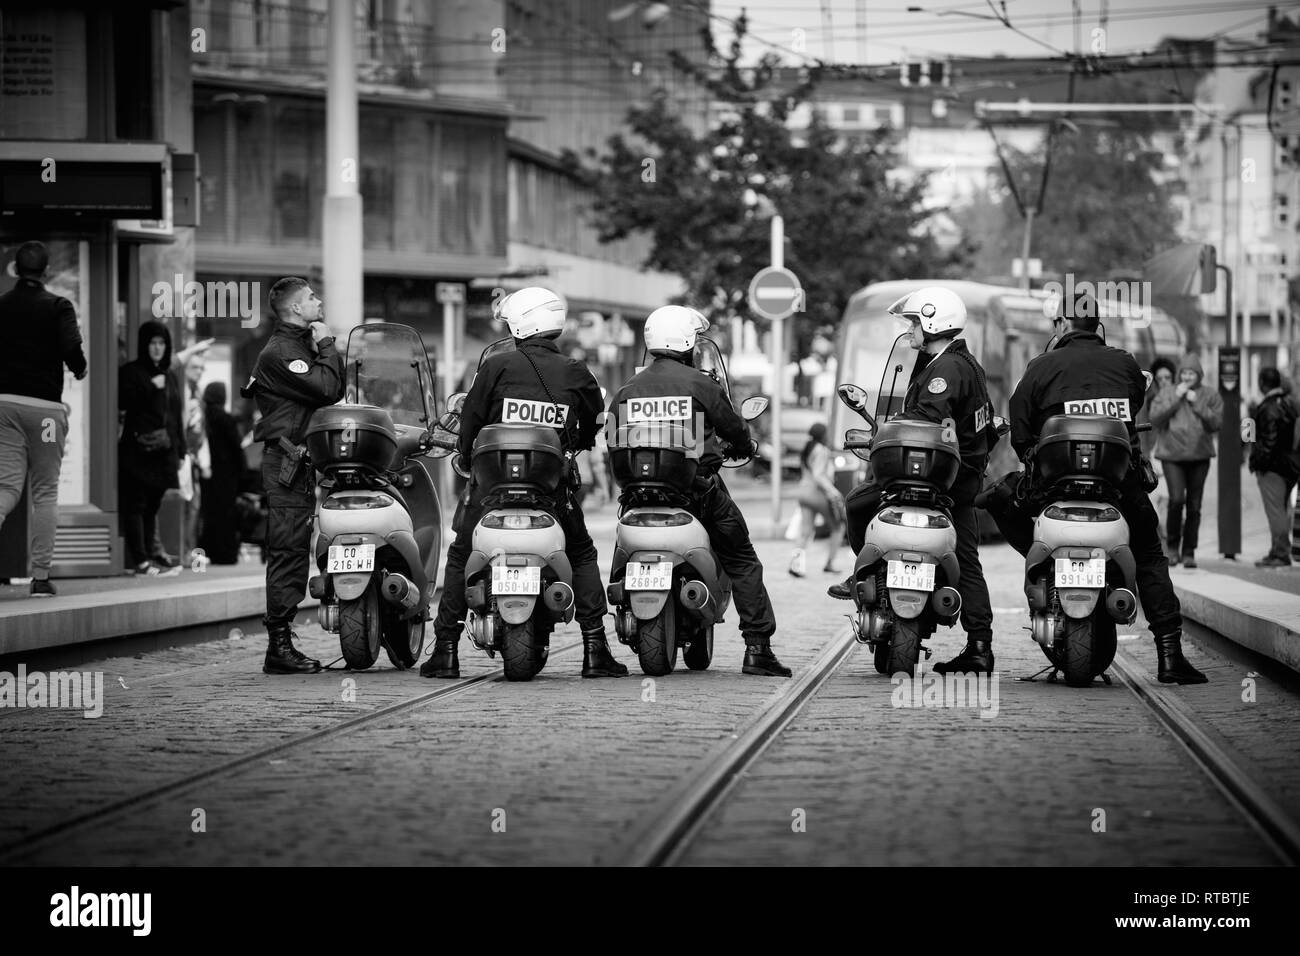 STRASBOURG, FRANCE - SEPT 12, 2017: Police on motorcycles preparing for political march during a French Nationwide day of protest against the labor reform proposed by Emmanuel Macron Government Stock Photo